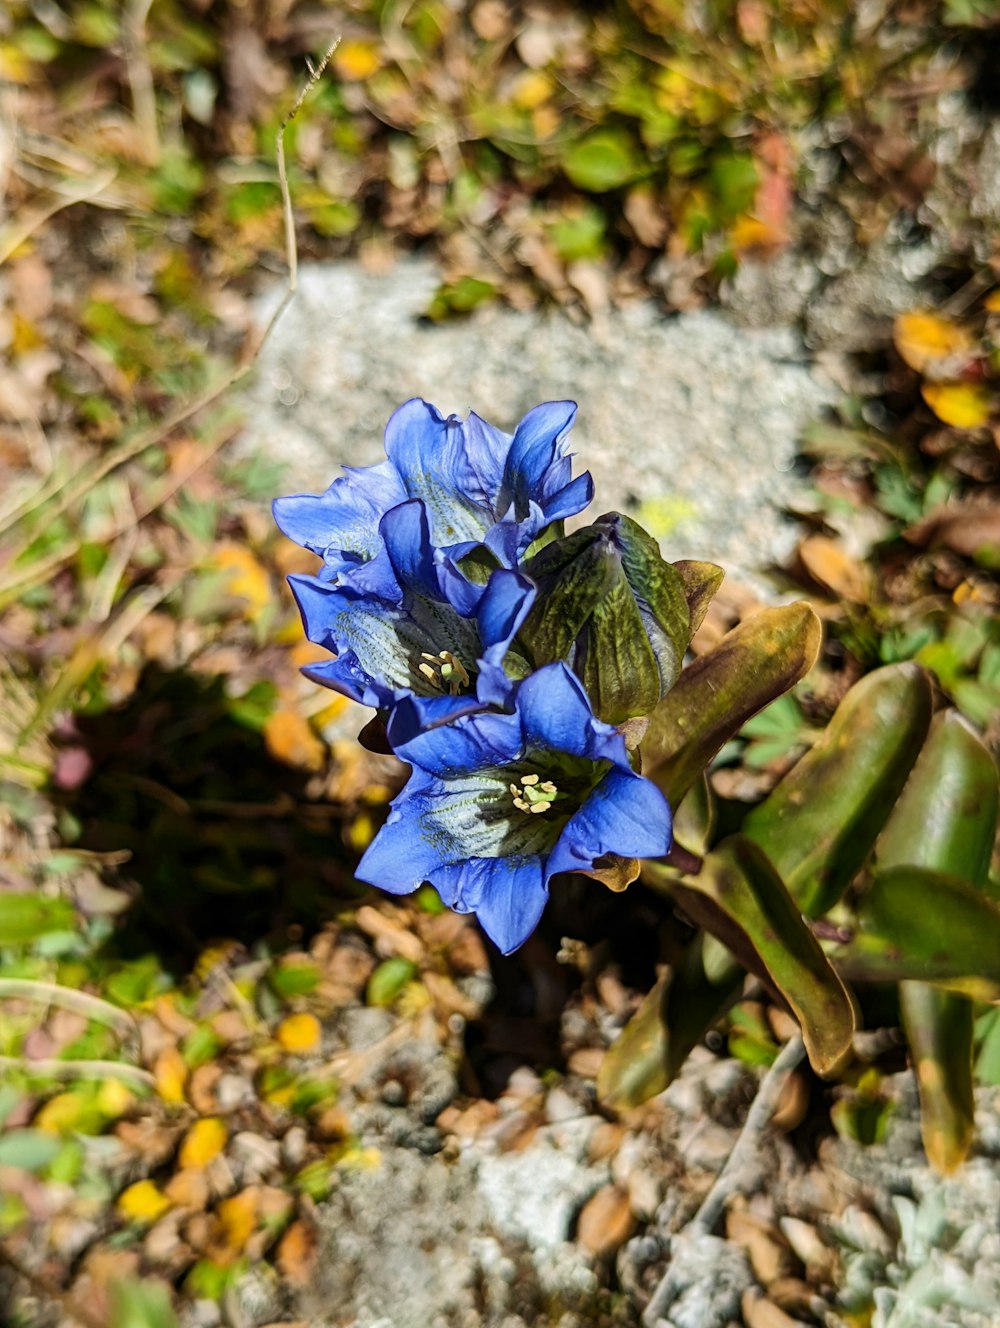 a blue flower with yellow center